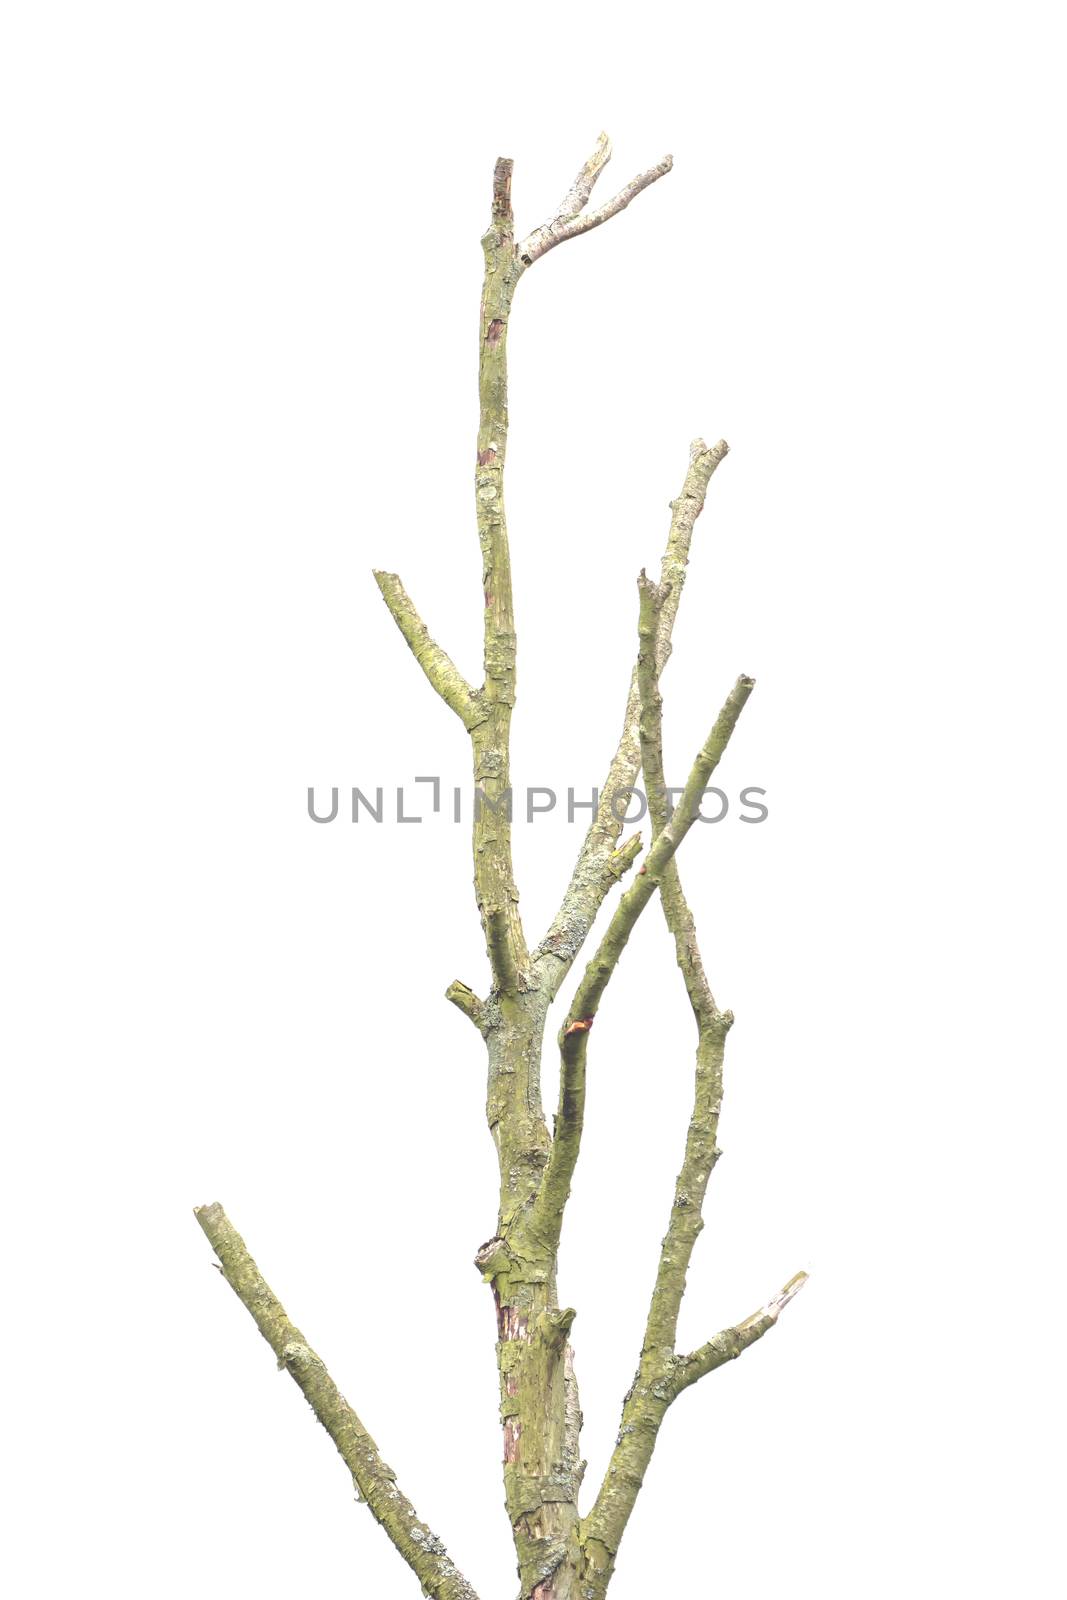 Tree with branches without leaves in front of white background